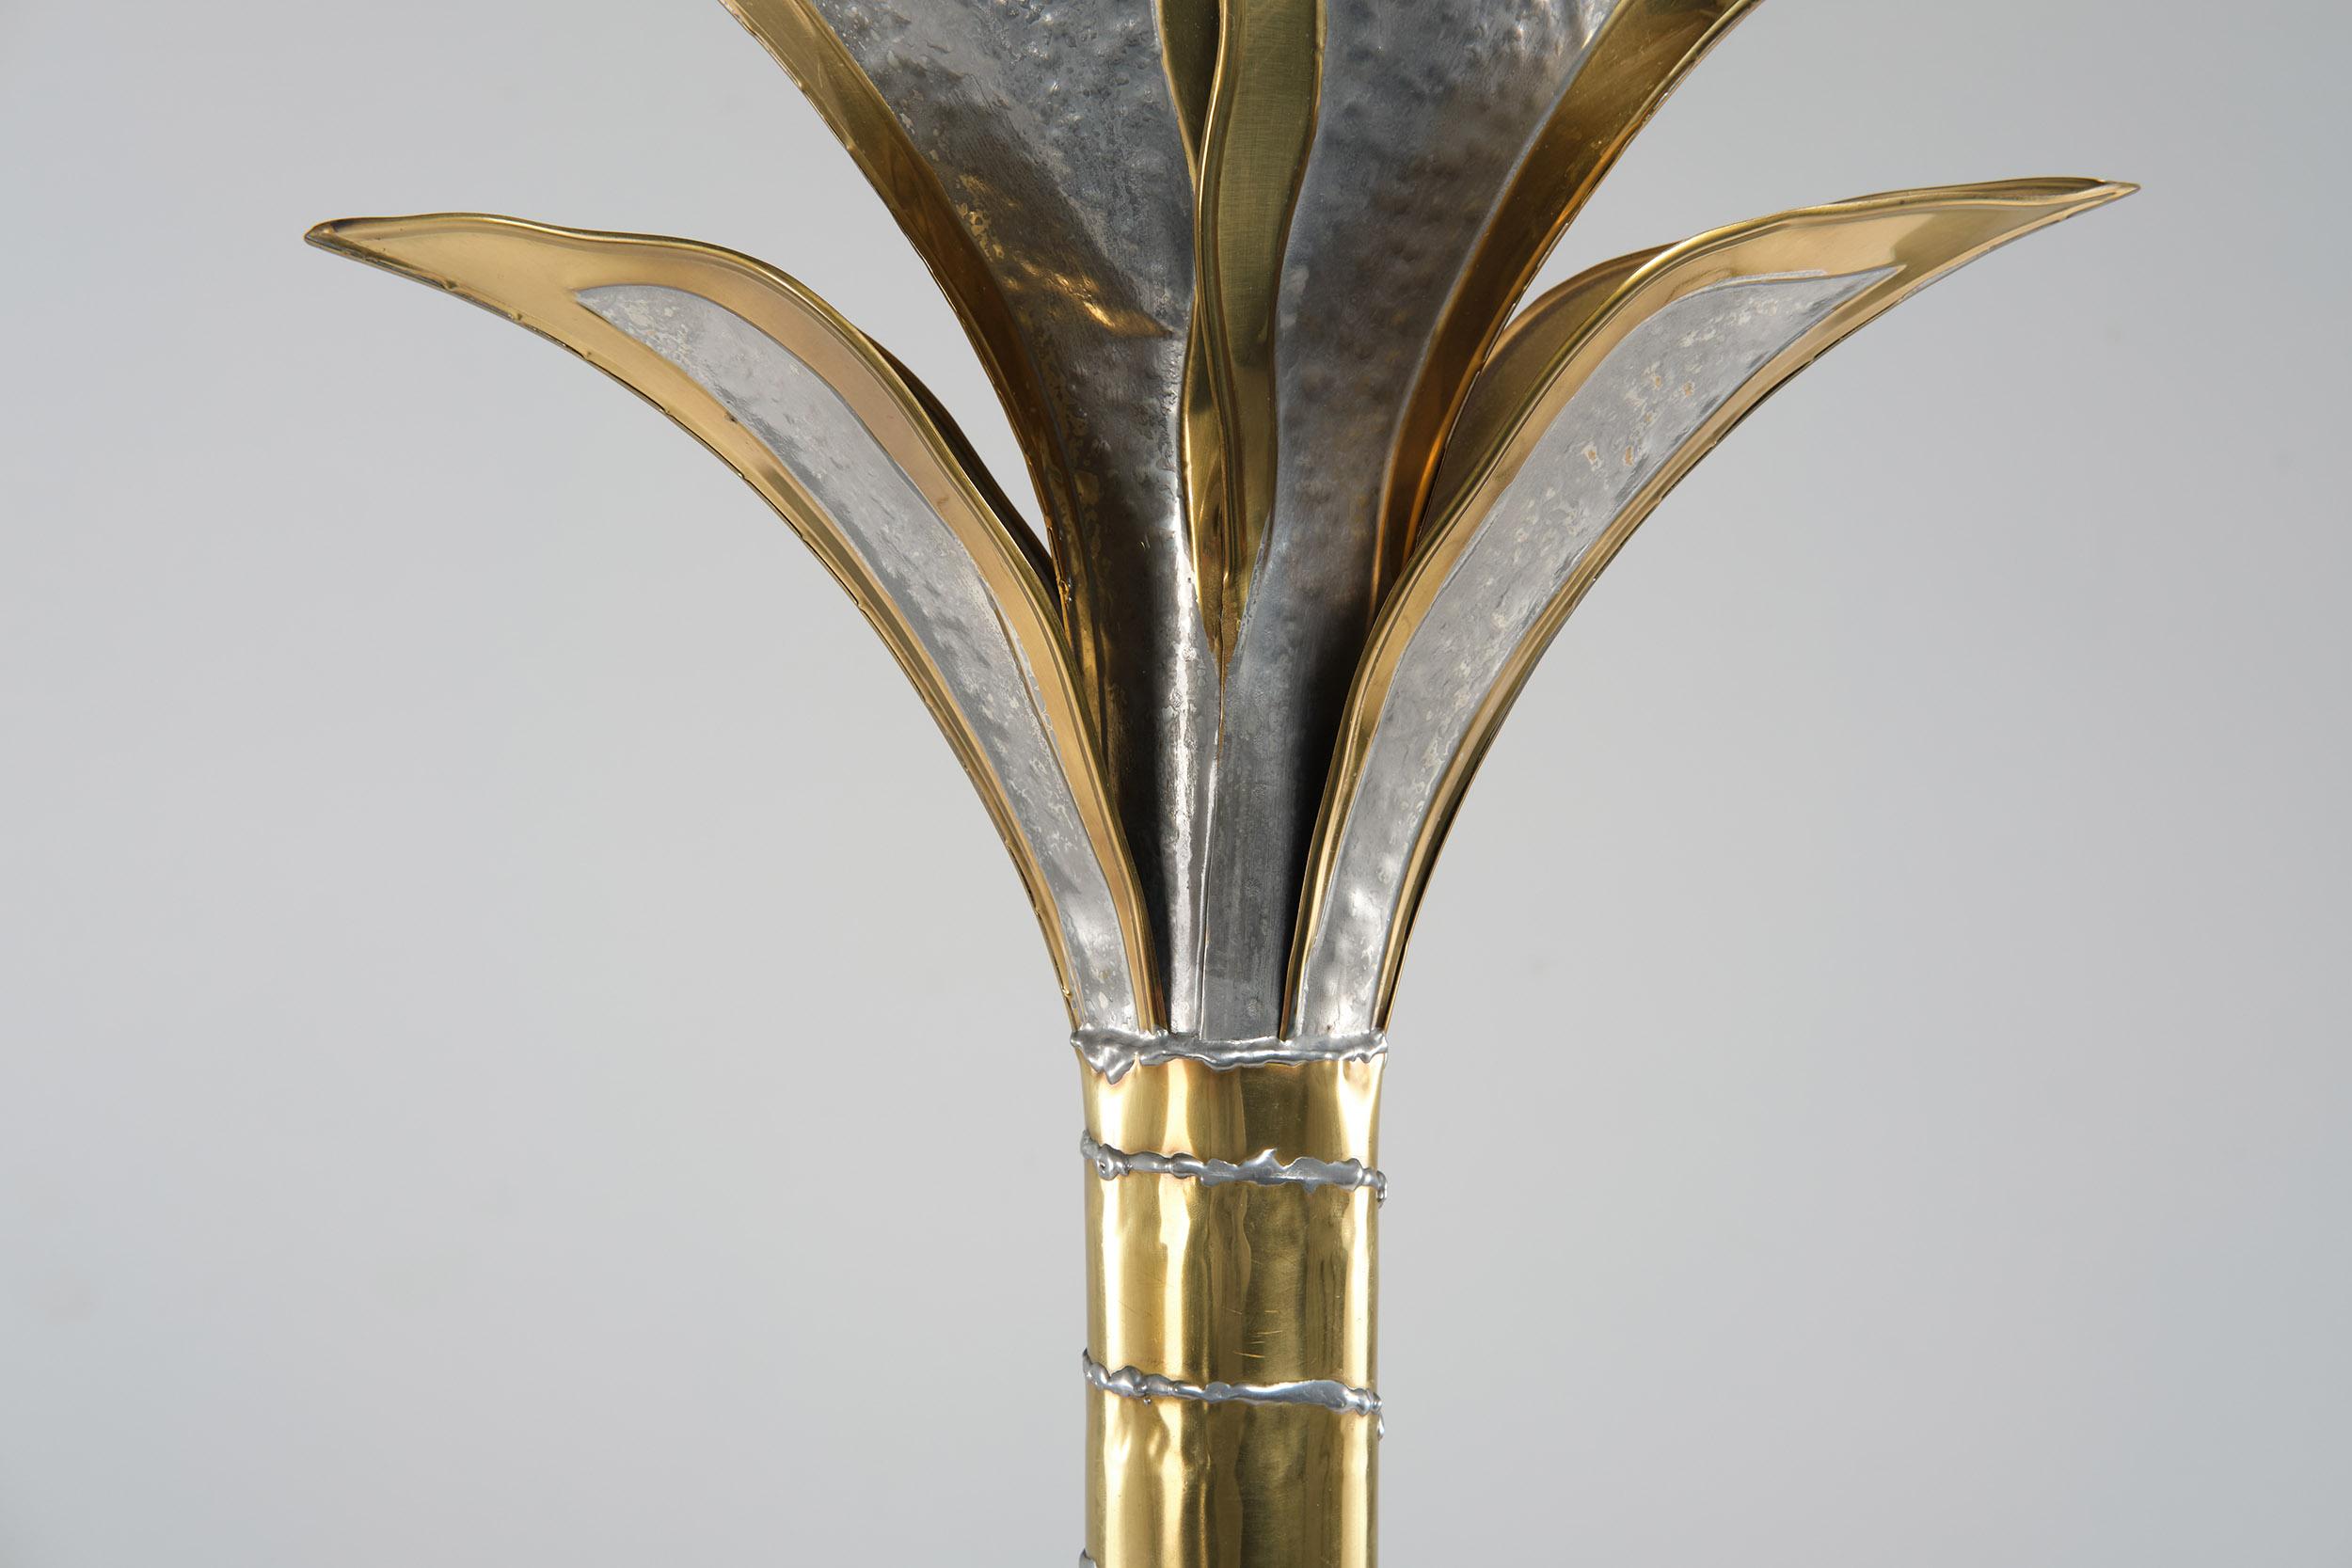 French Maison Jansen Palm Floor Lamp in Brass and Metal, 1970 circa